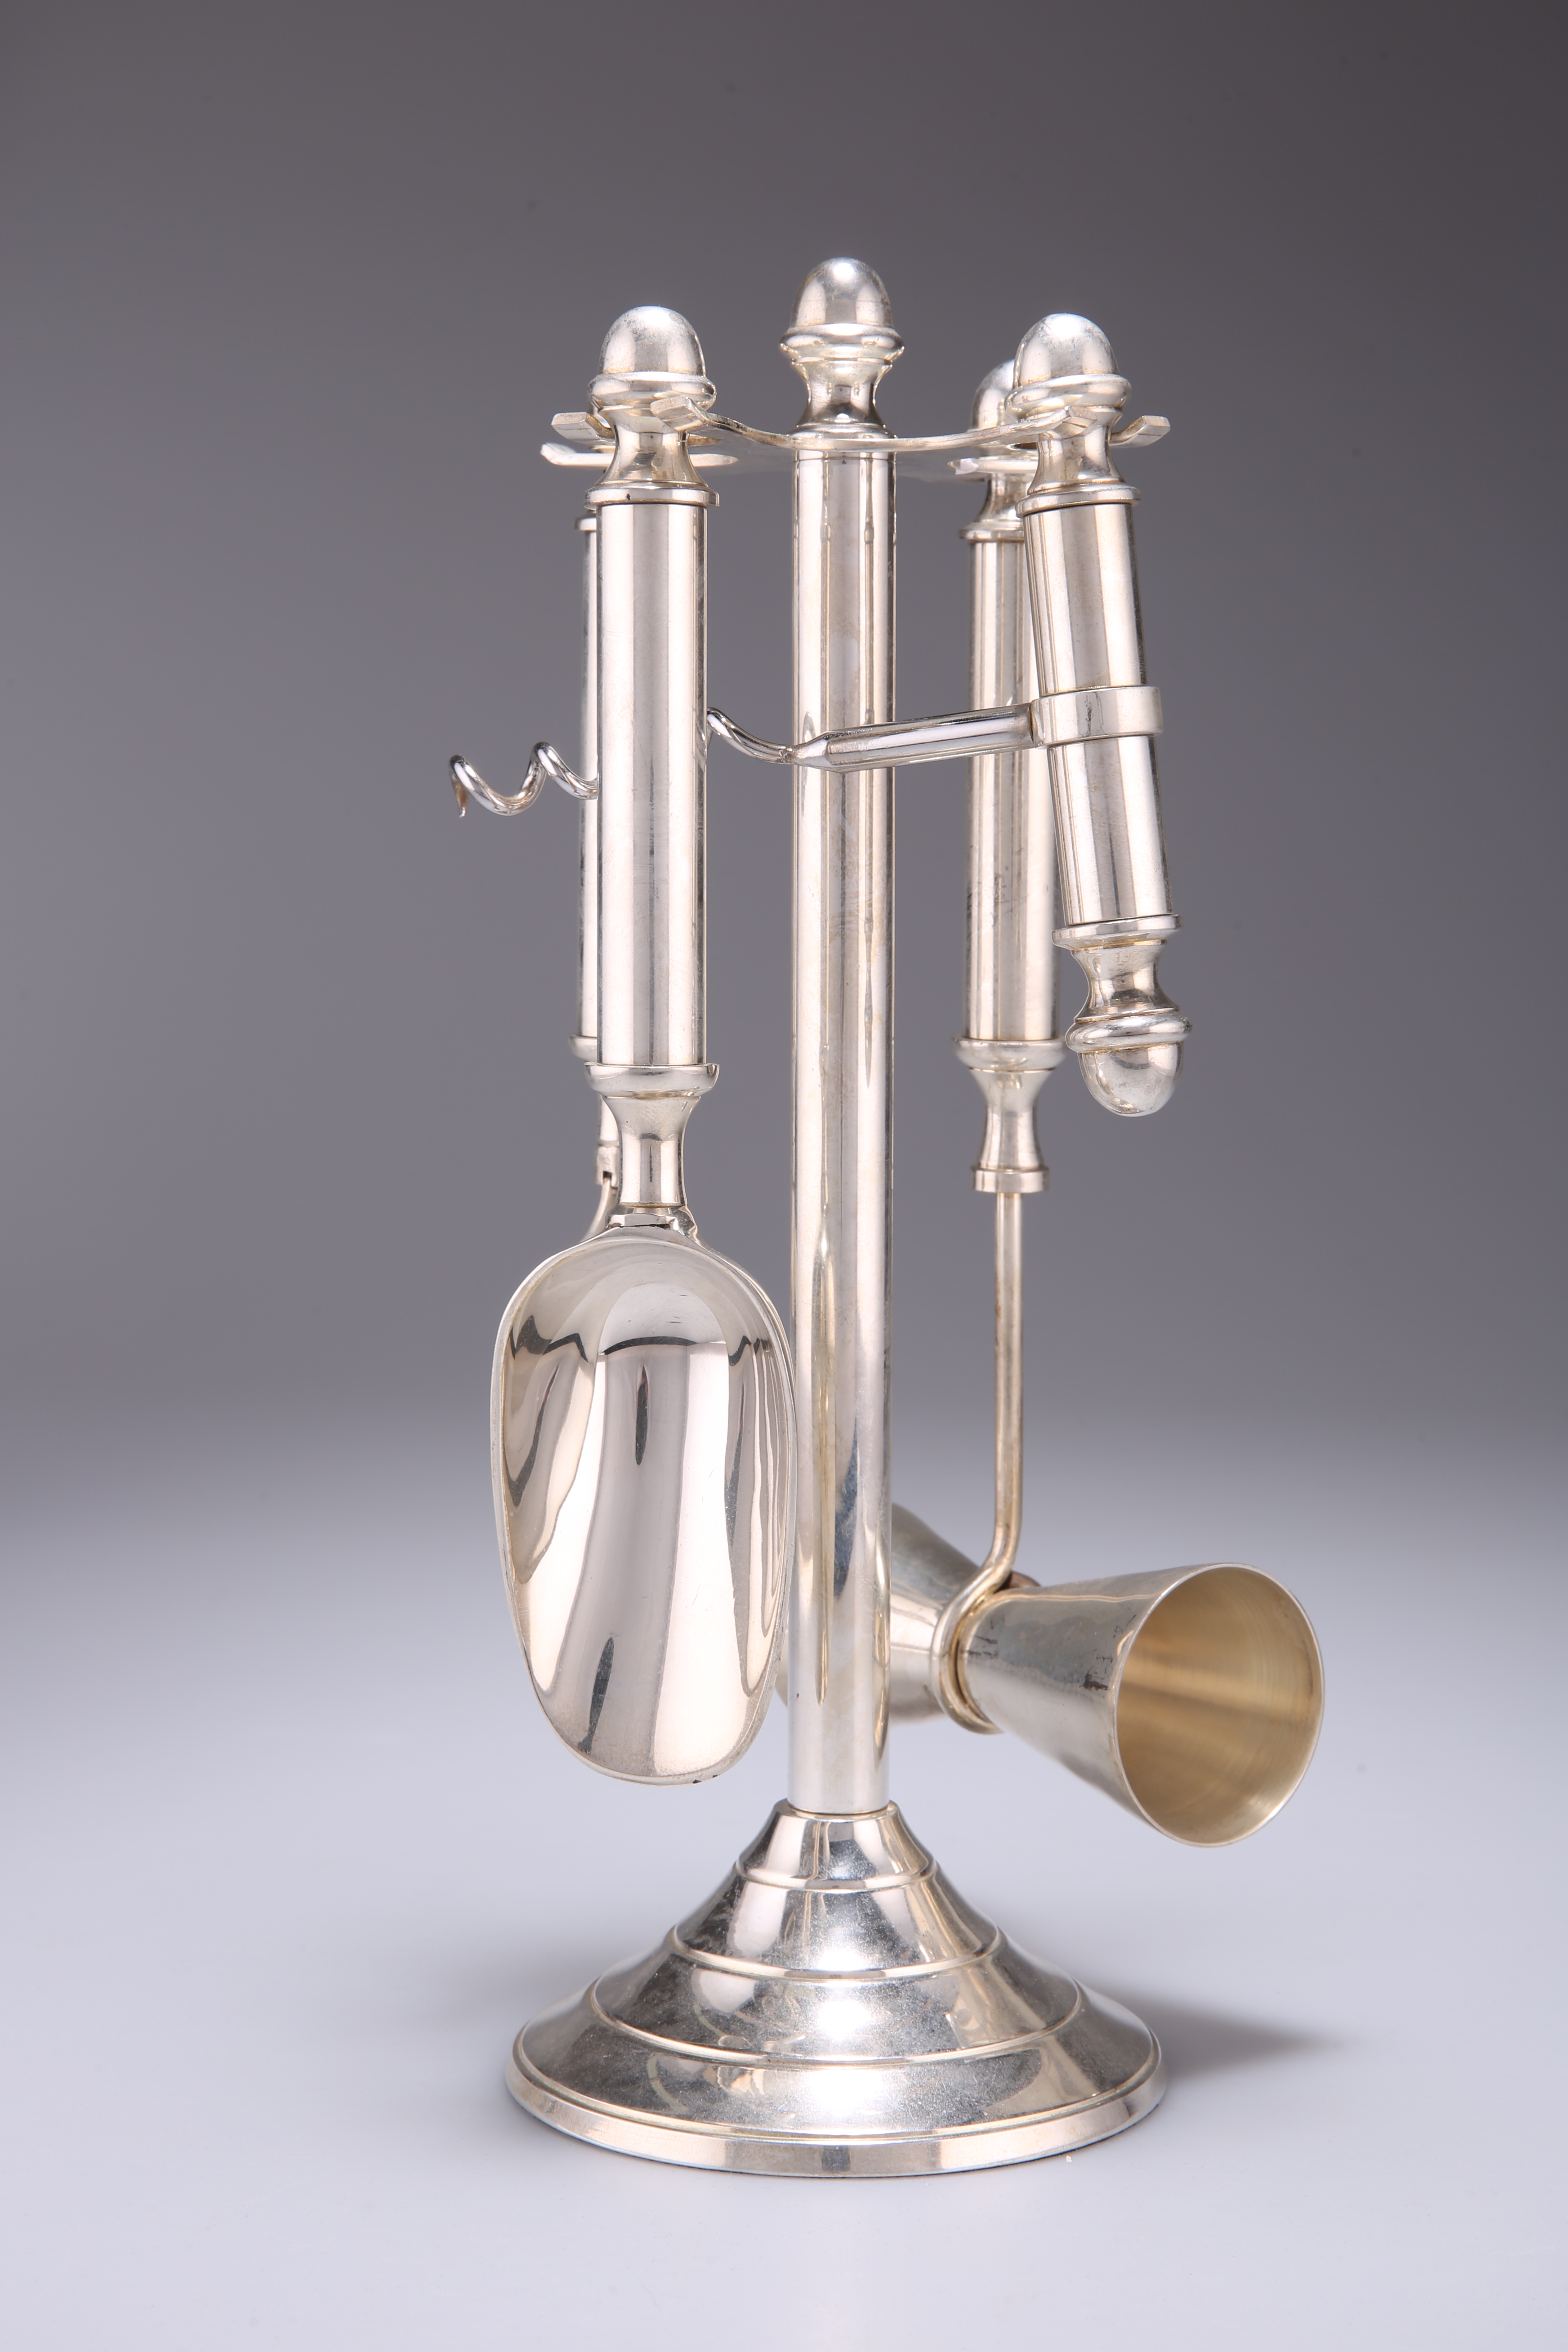 AN ART DECO STYLE SILVER-PLATED DRINKS COMPANION - Image 2 of 2